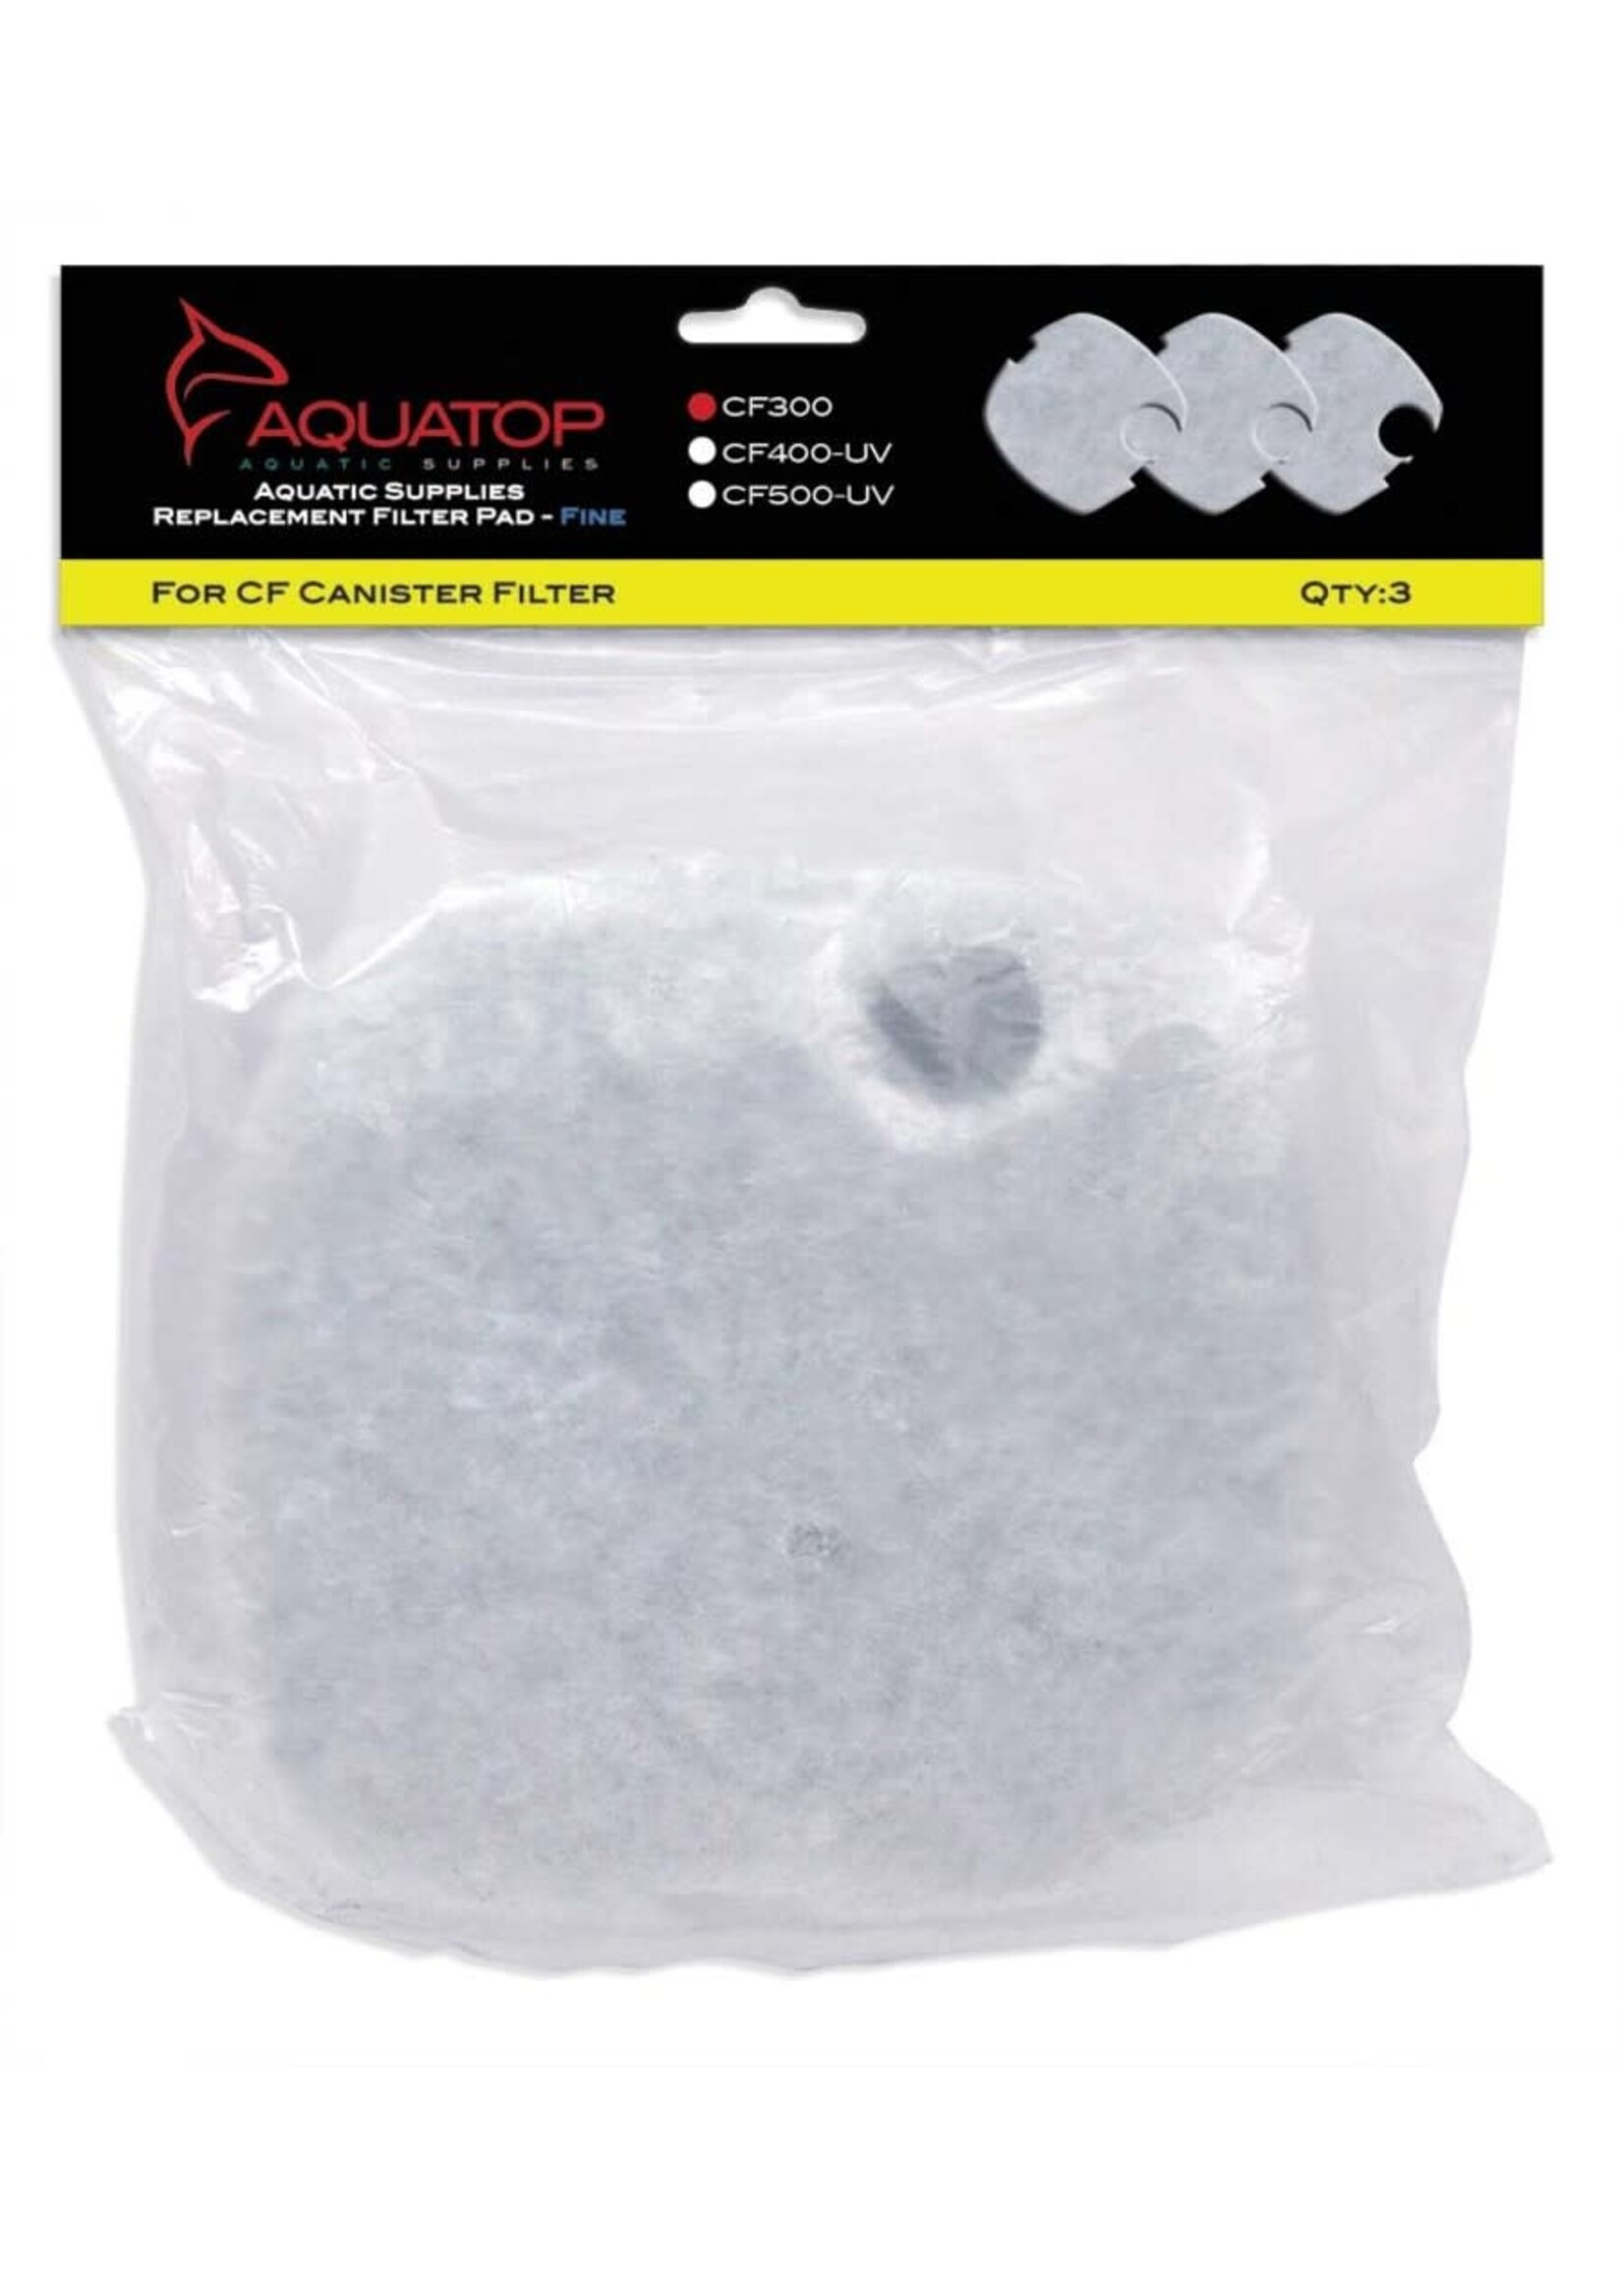 Aquatop CANISTER REPLACEMENT FINE FILTER PAD CF300